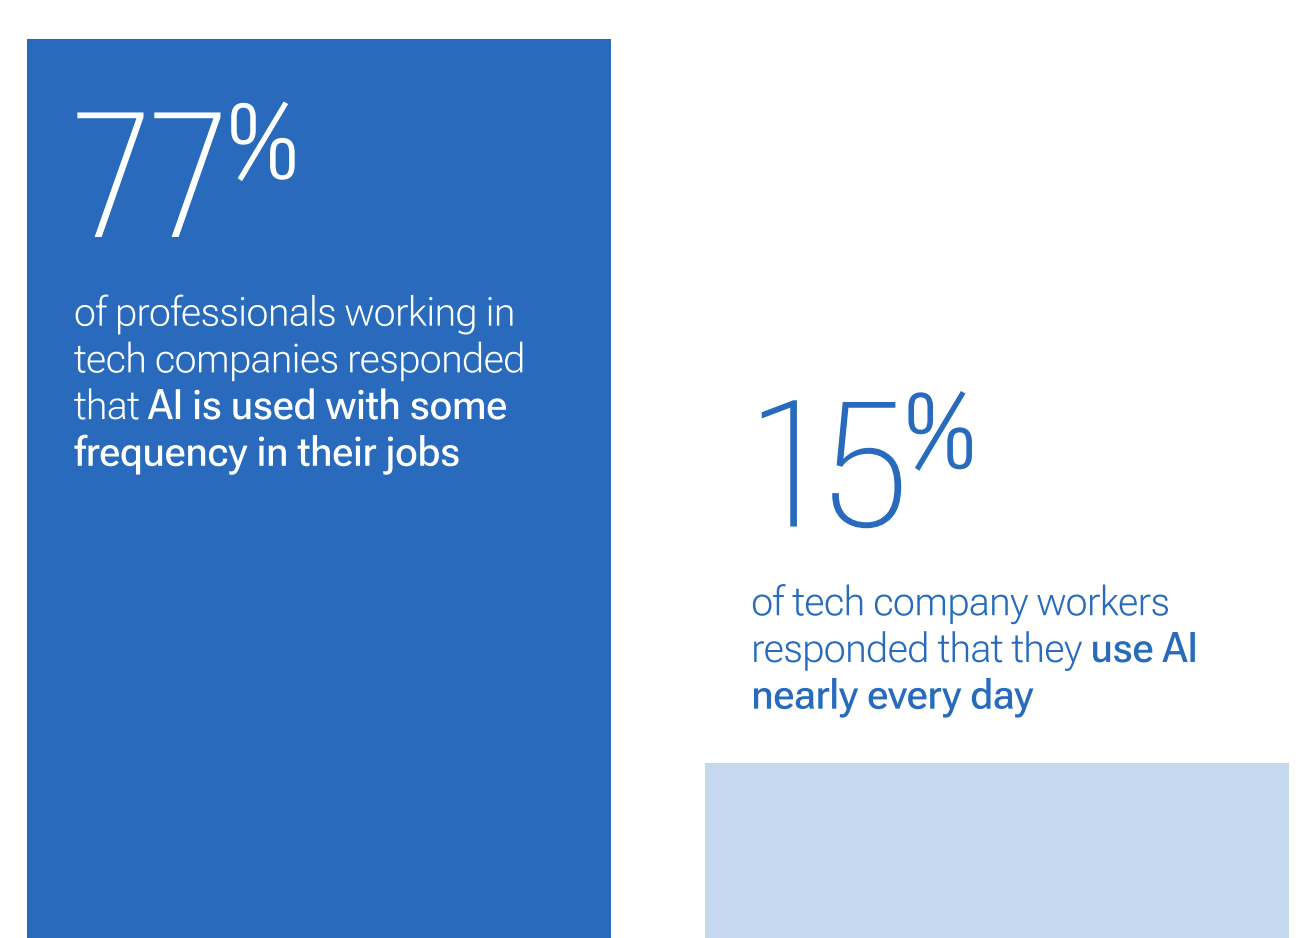 77% of professionals working in tech companies responded that AI is used with some frequency in their jobs. 15% of tech company workers responded that they use AI nearly every day.